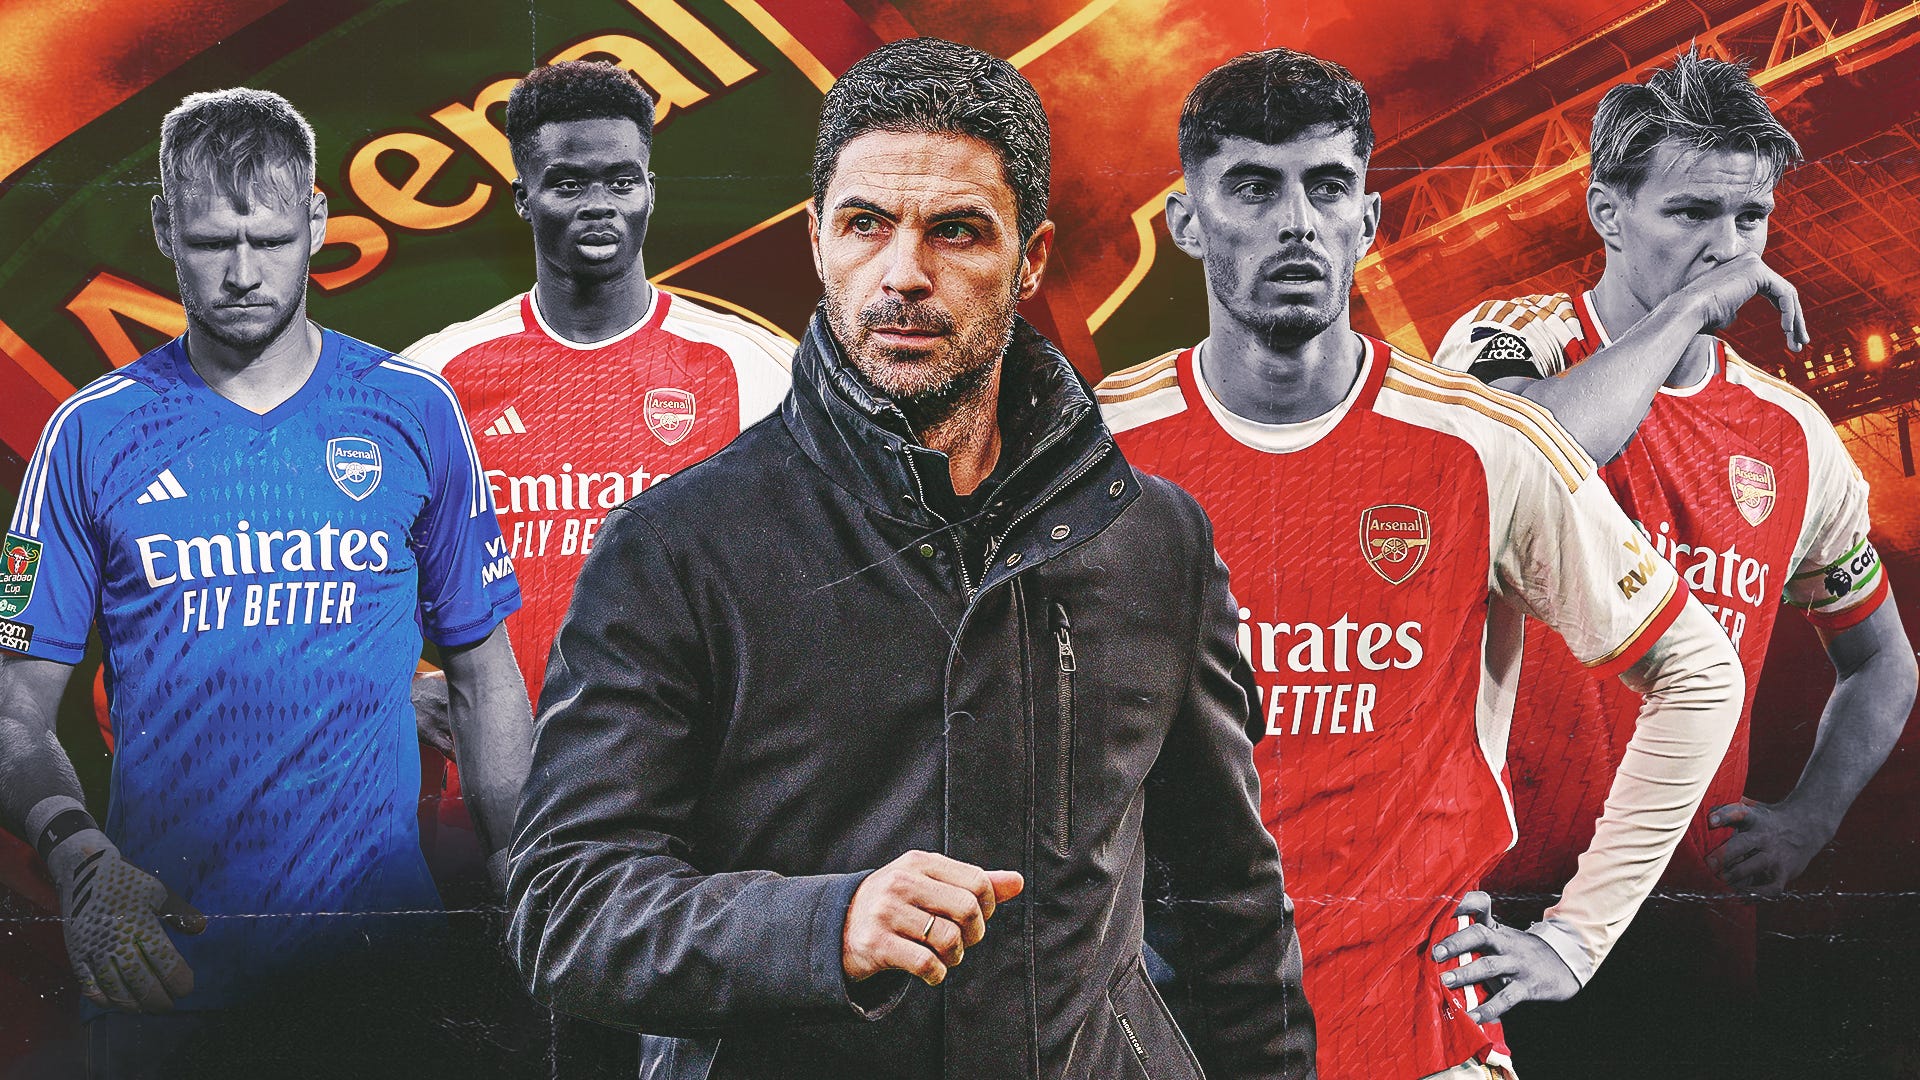 Arsenal are going backwards! Mikel Arteta's position should be called into question after latest loss as toothless Gunners once again pay for his transfer choices | Goal.com